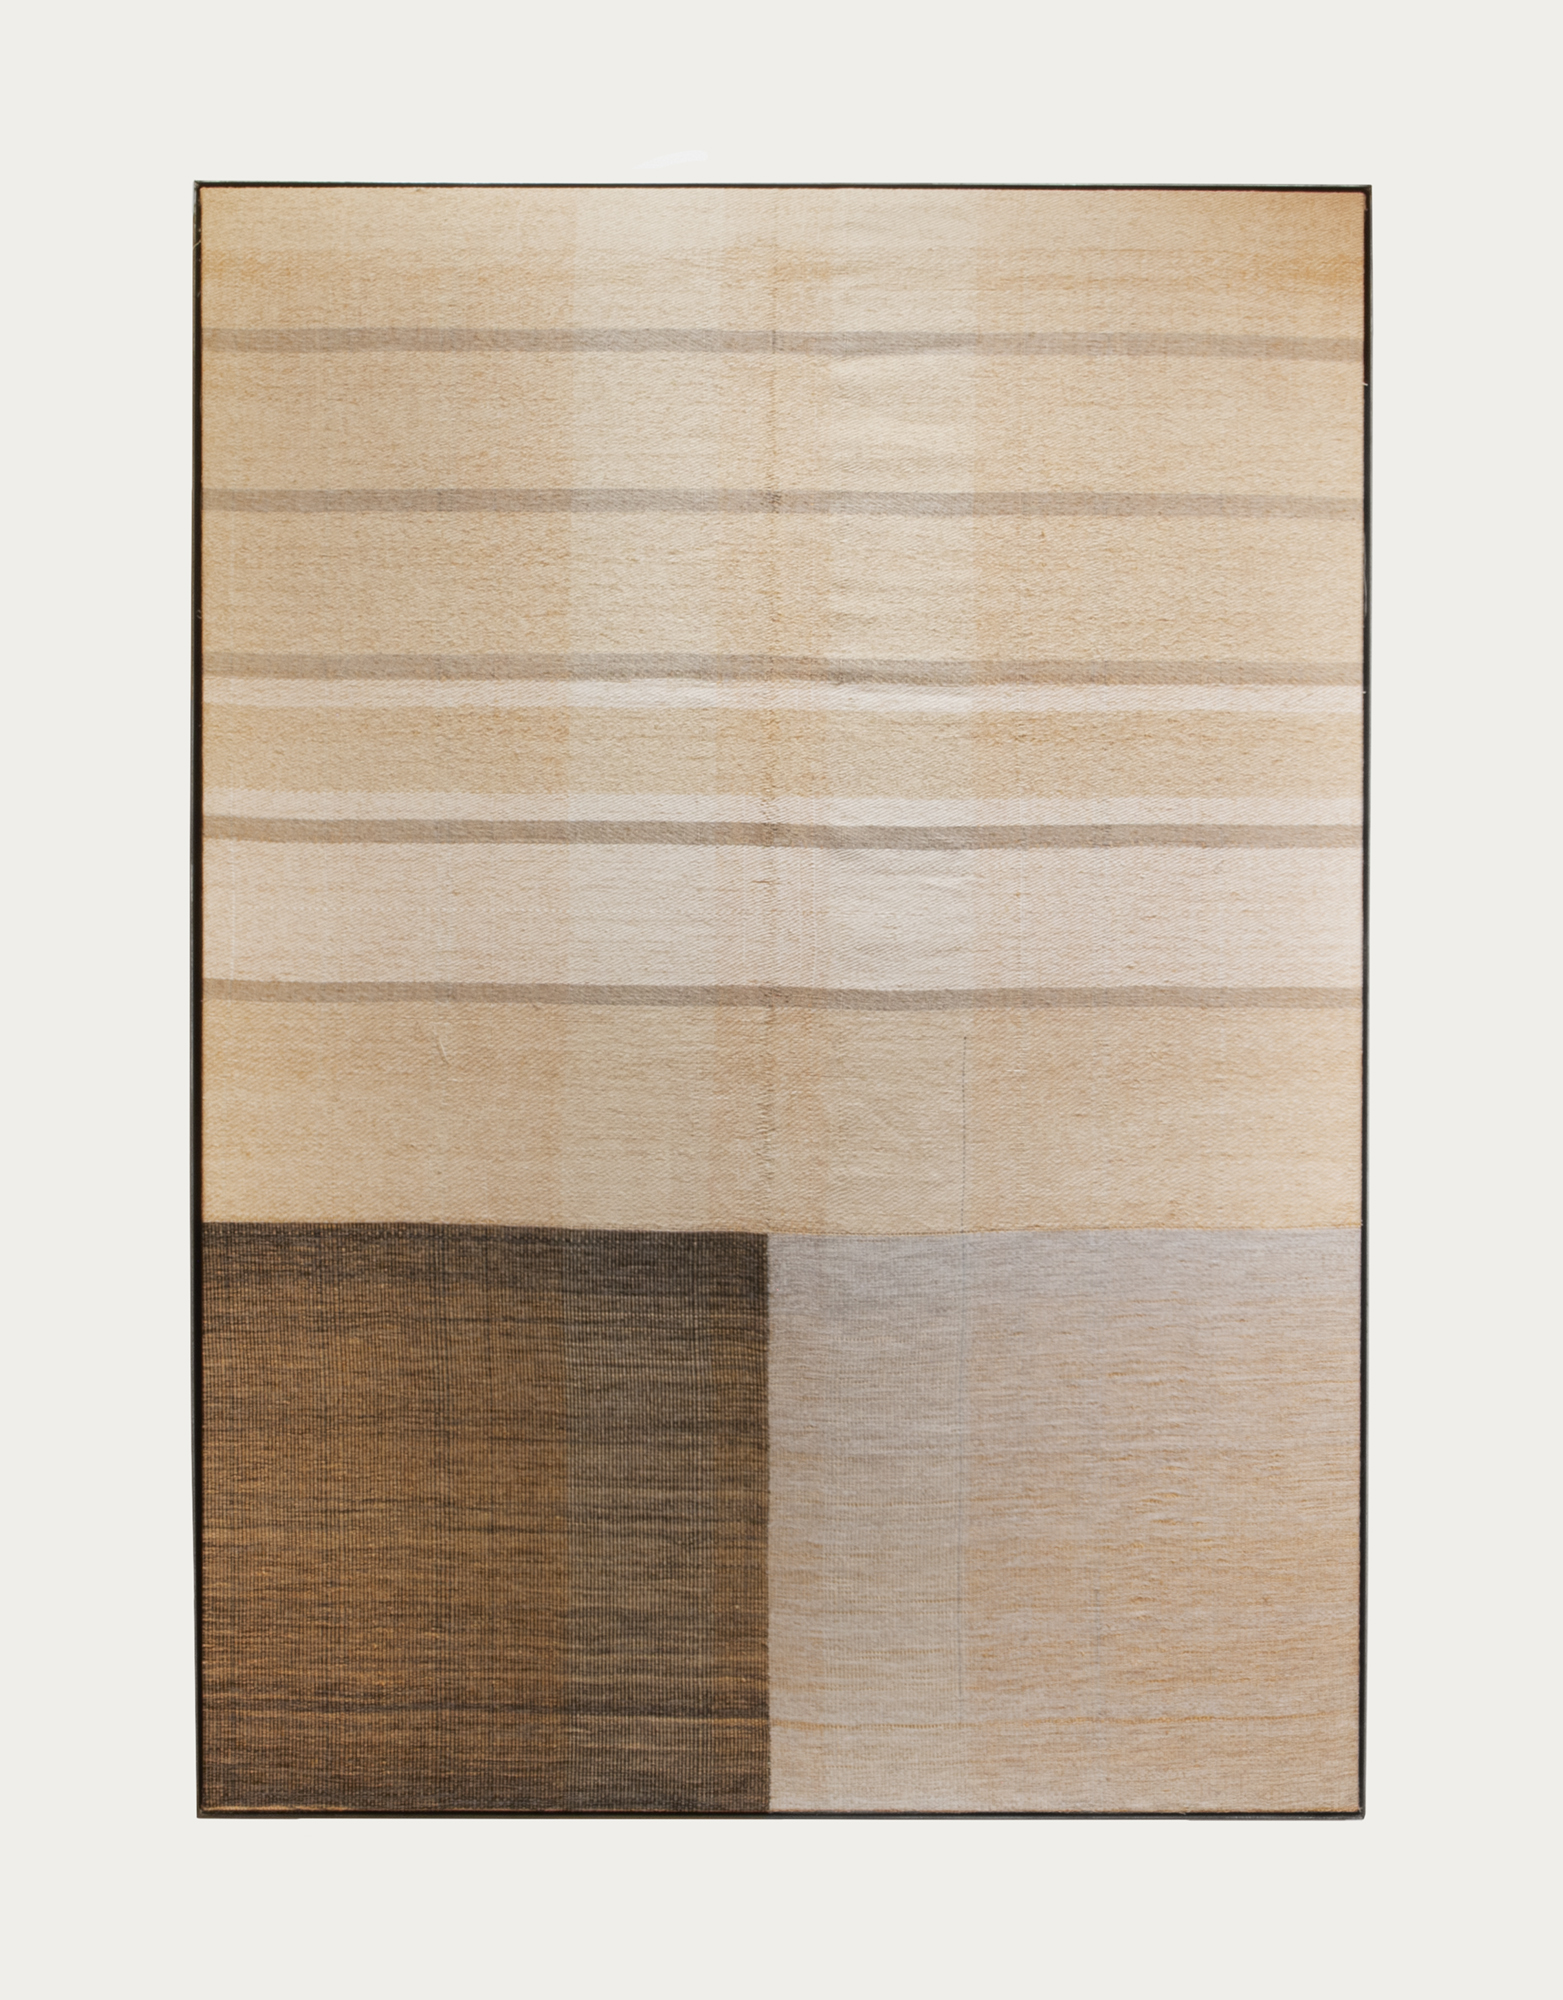 

											Elizabeth Hohimer</b>

											<em>
												Cessation</em> 

											<h4>
												June 26 – August 29, 2020											</h4>

		                																																													<i>Notation,</i>  
																																								2020, 
																																								hand woven double pine paper yarn cloth stretched over canvas in steel frame, 
																																								84 5/8 x 60 3/4 x 2 1/2 inches 
																								
		                				